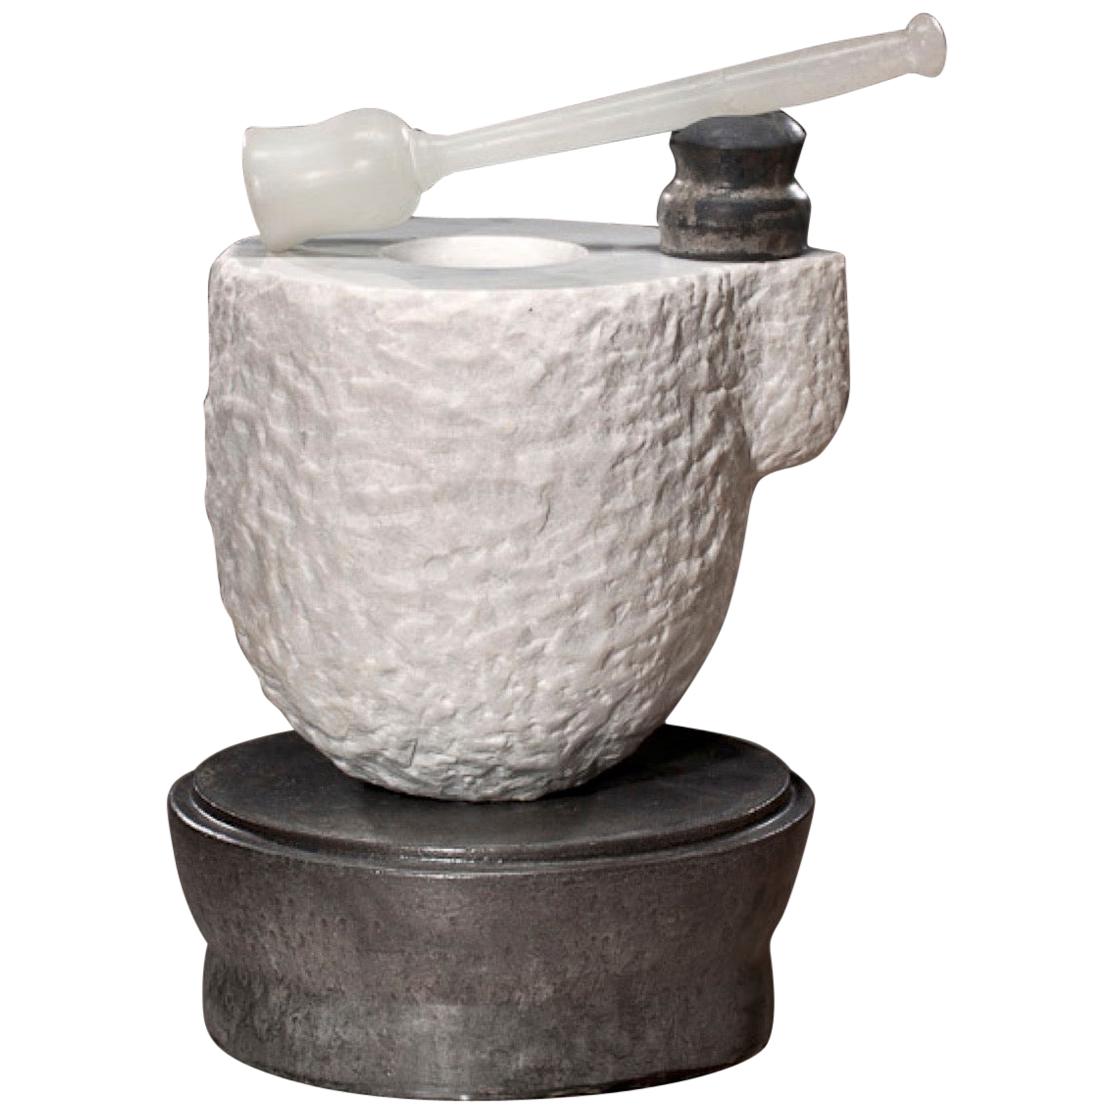 Richard Hirsch White Marble Mortar and Glass Pestle Sculpture, 2006 - 2010